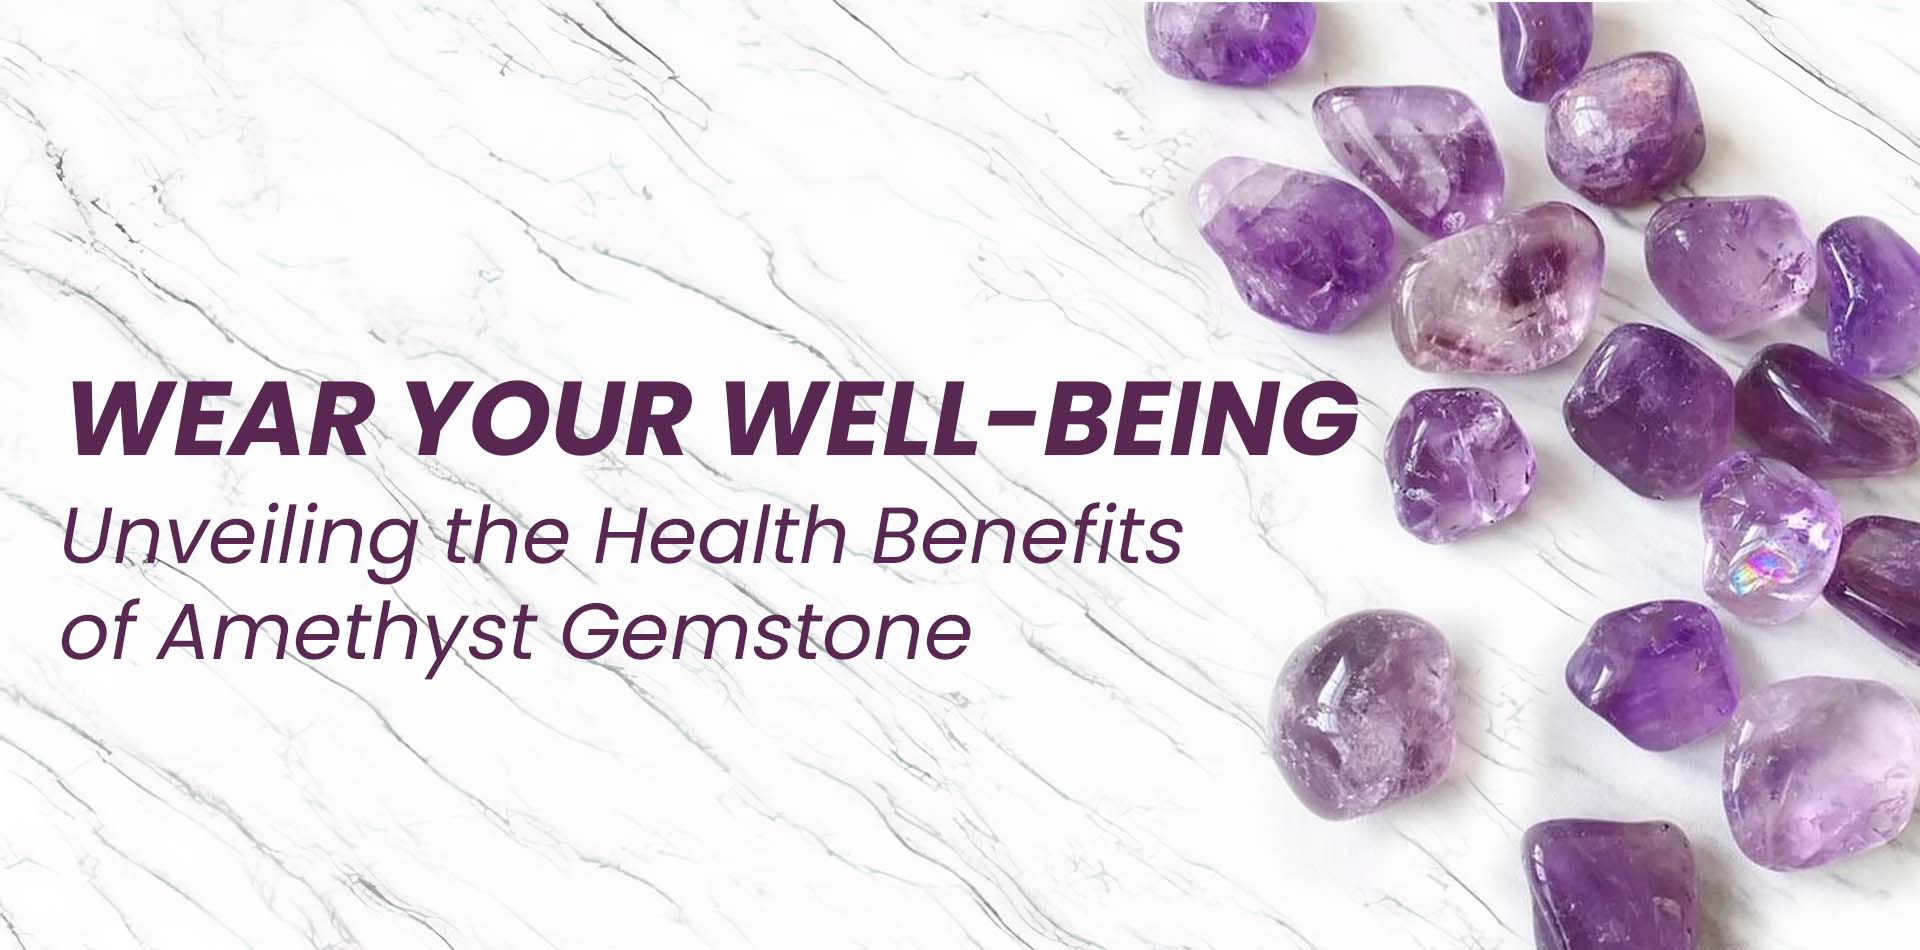 Wear Your Well-Being: Unveiling the Health Benefits of Amethyst Gemstone